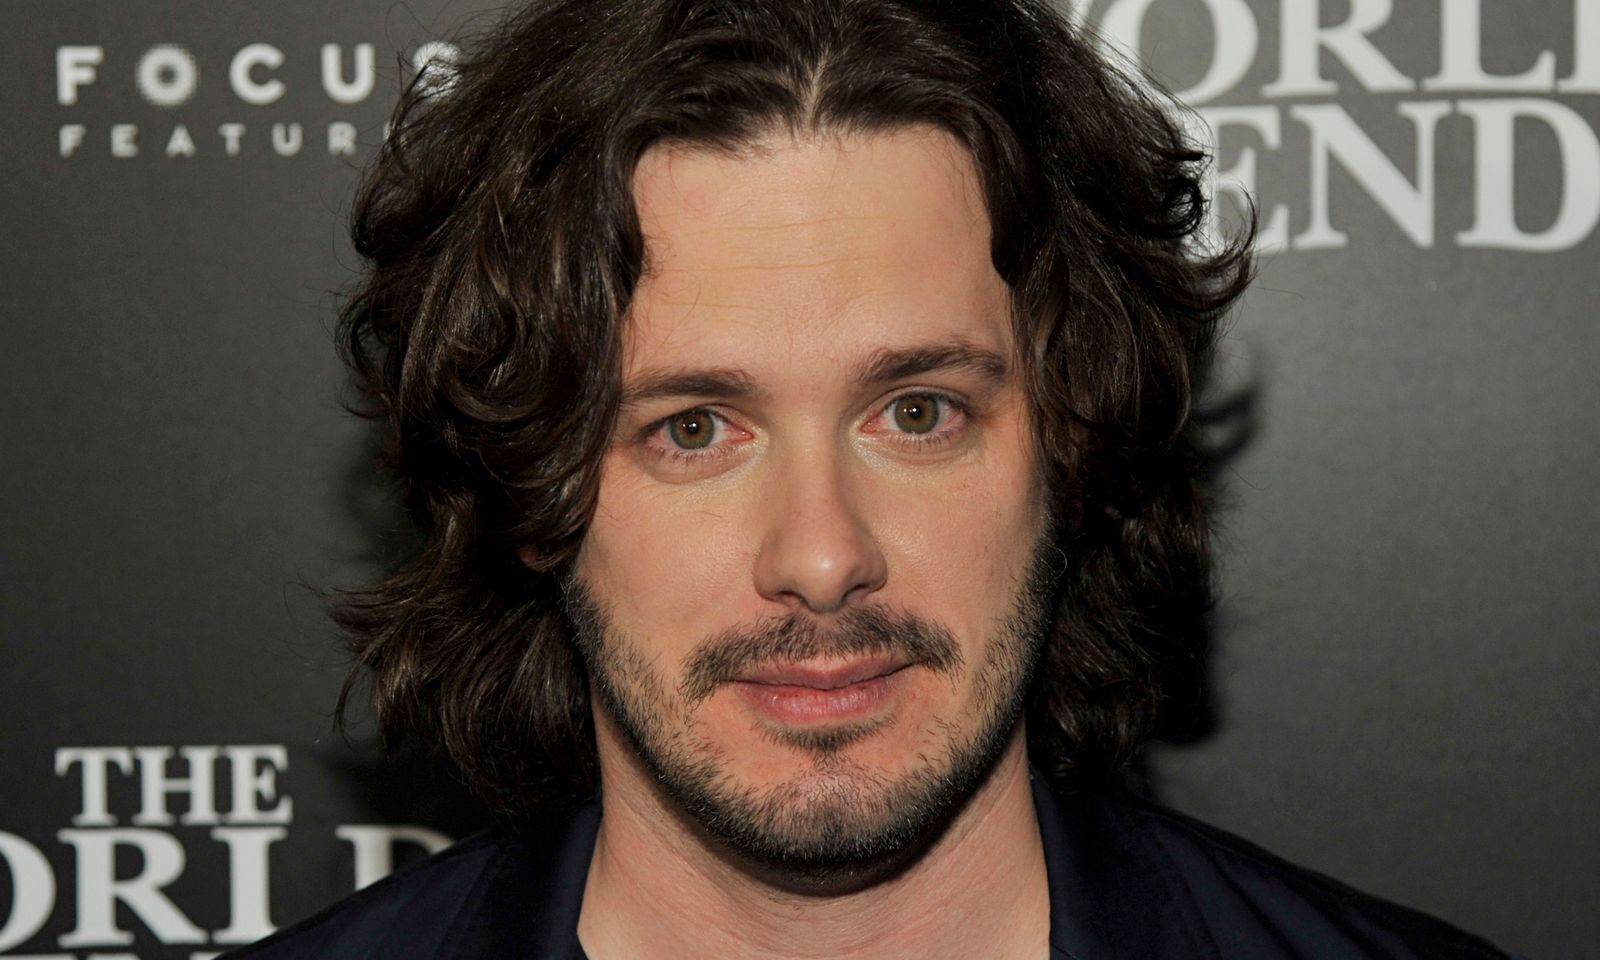 Edgar Wright Reveals His Reason For Not Directing 'Ant-Man'